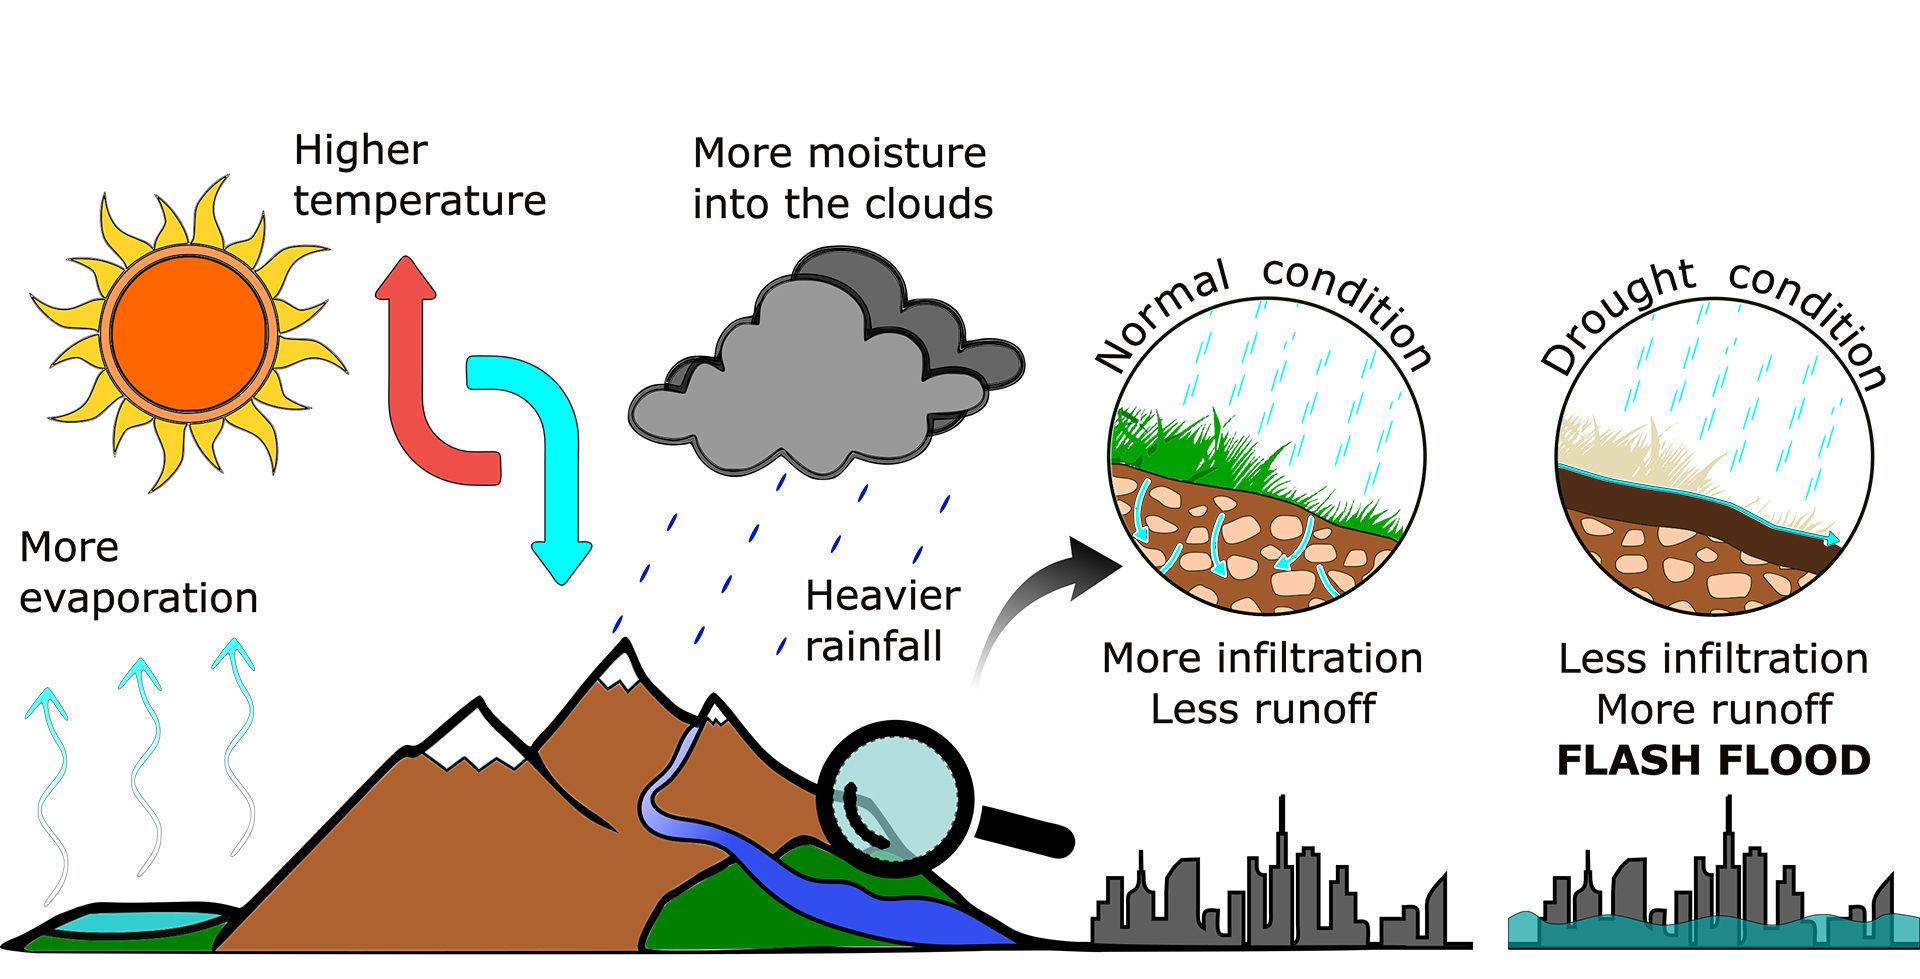 Hydrological events